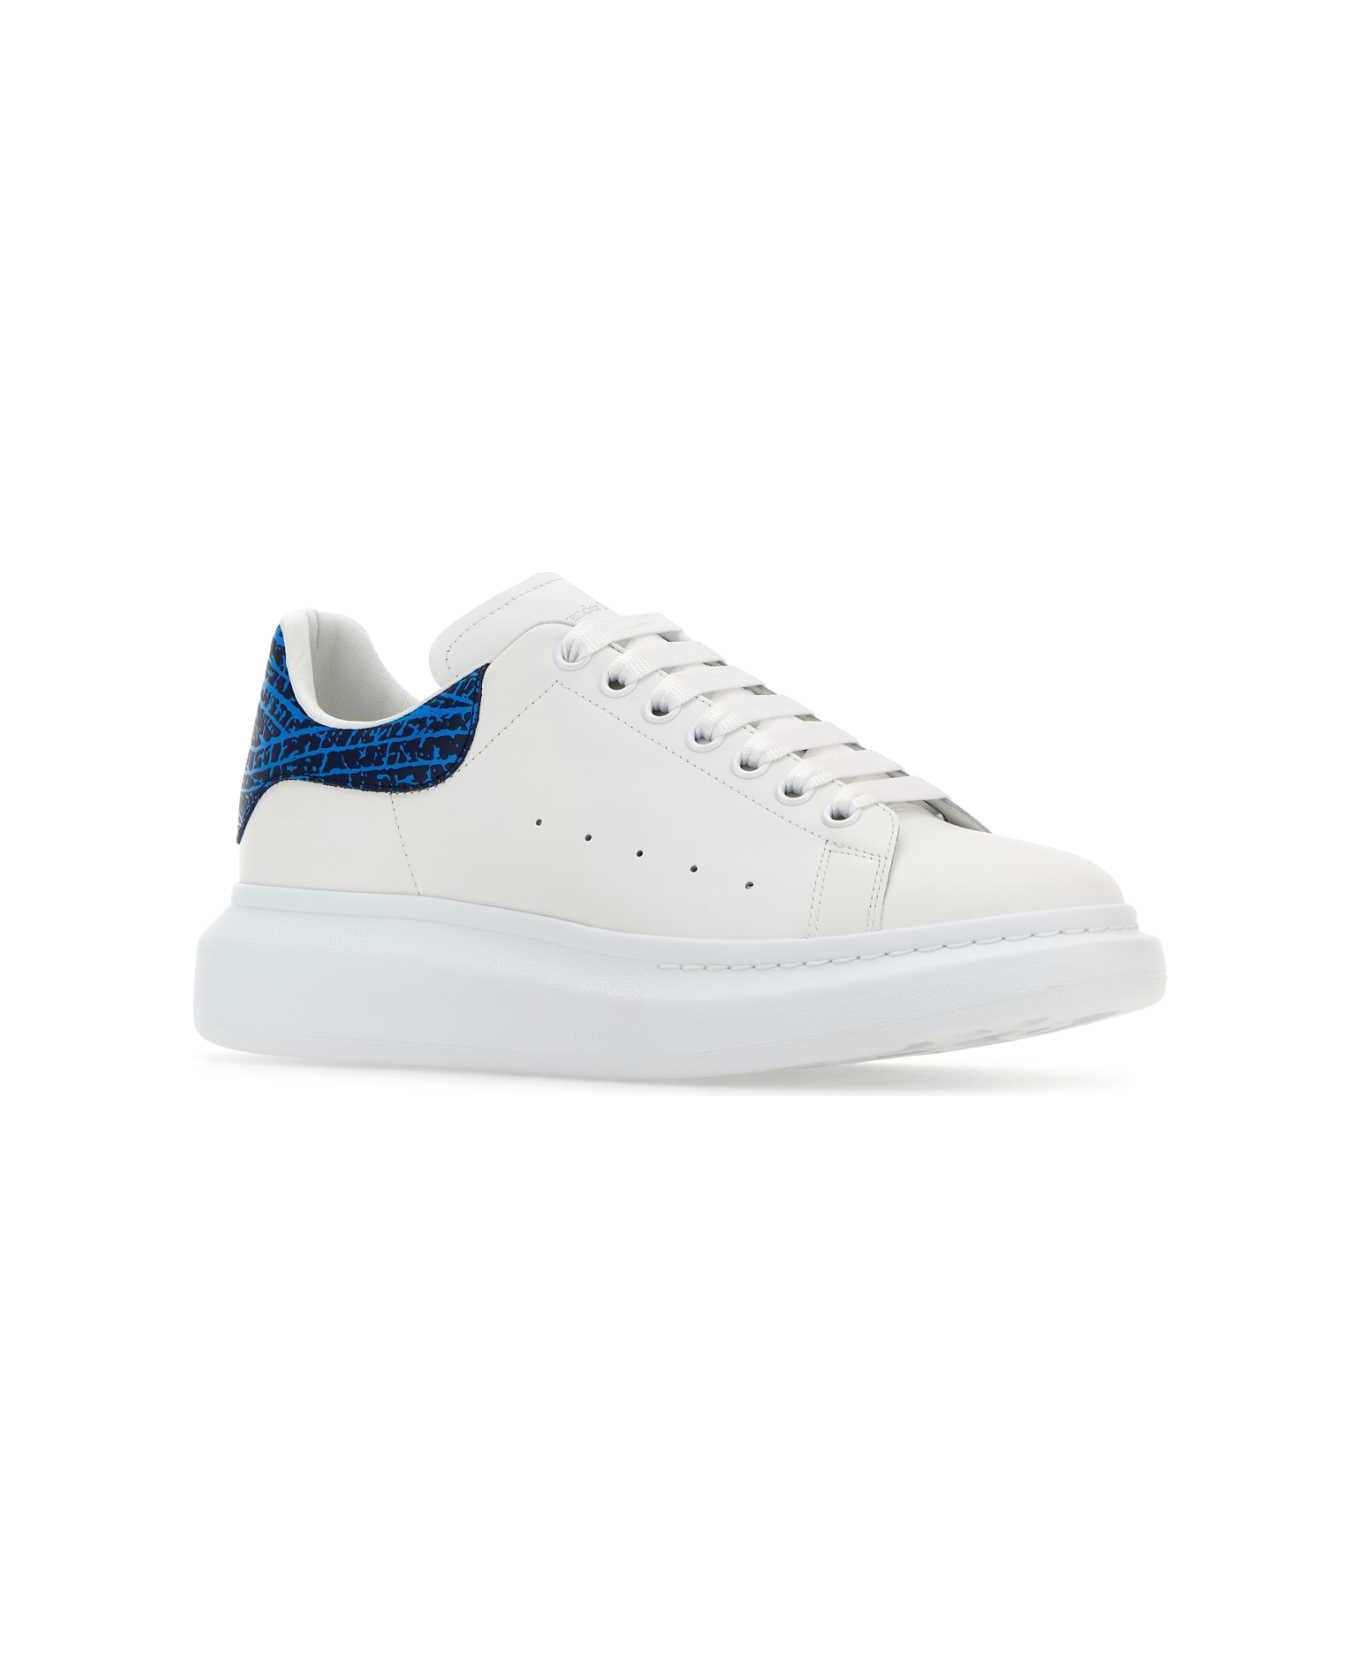 Alexander McQueen White Leather Sneakers With Printed Leather Heel - WHITELAPISBLUE